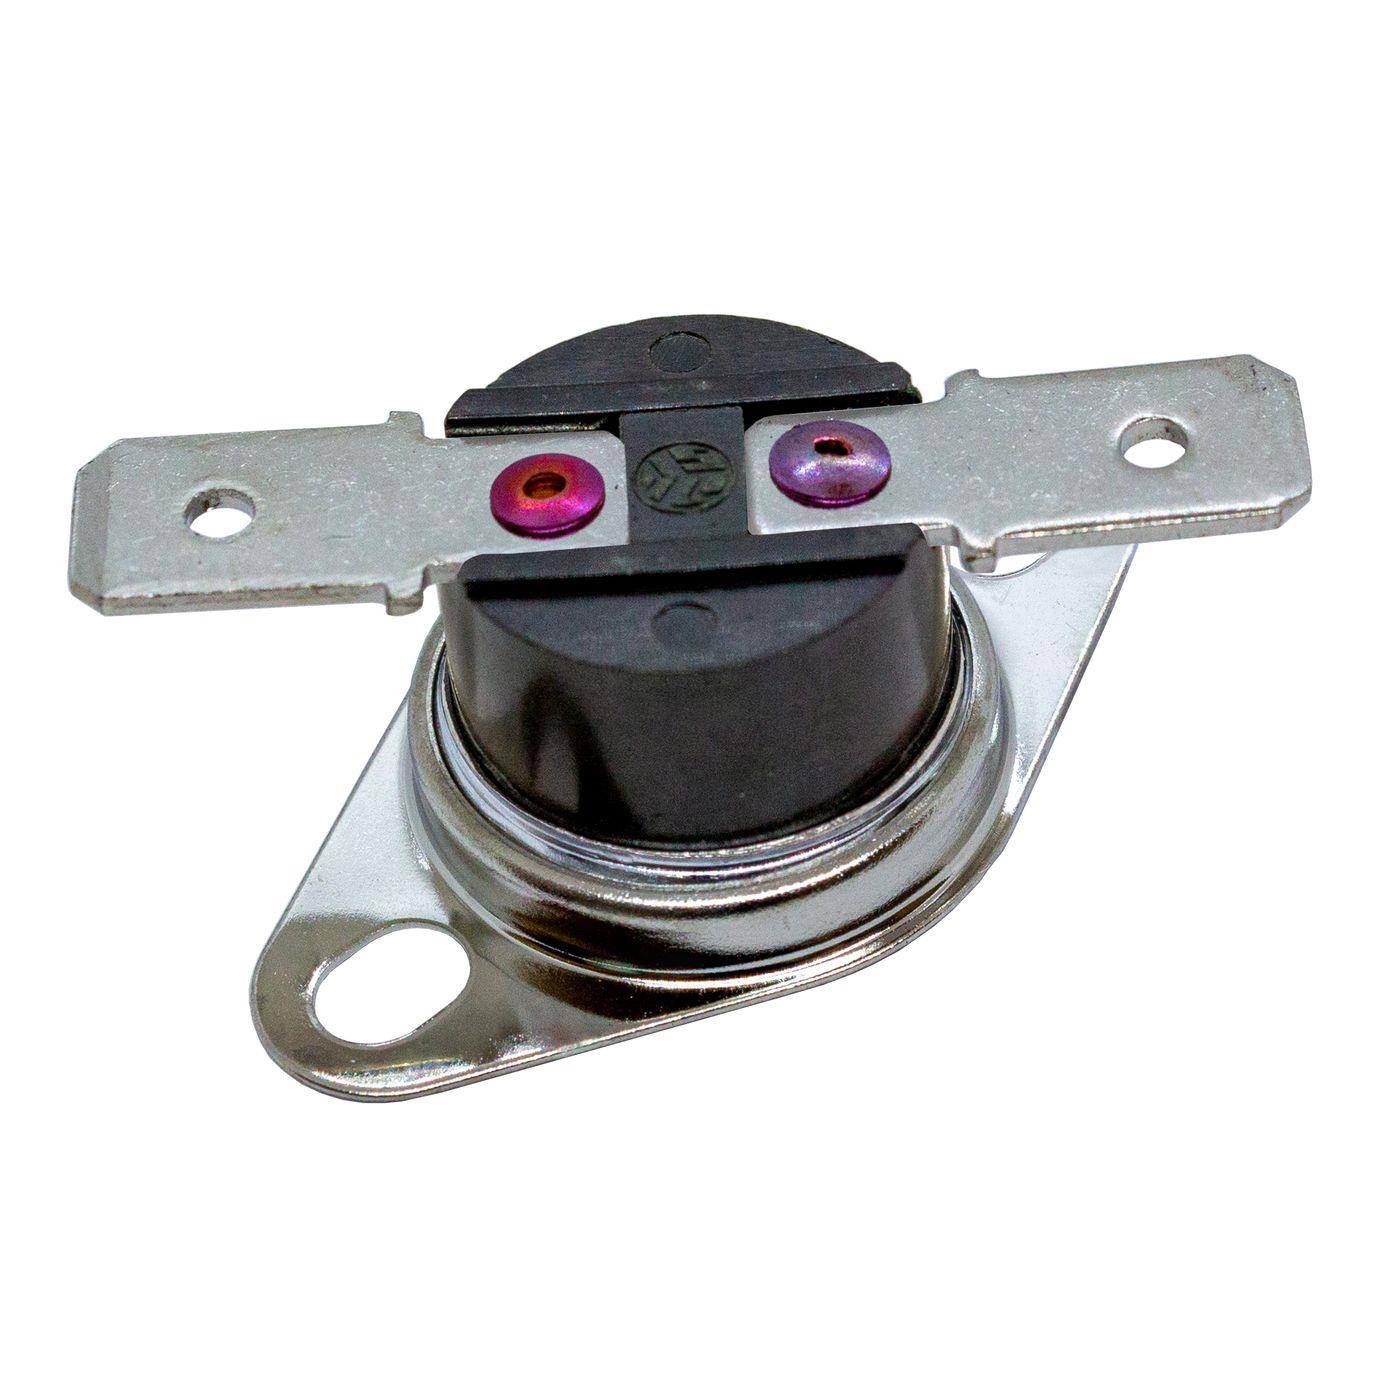 Thermal switch 45°C NO contact 250V 10A Temperature switch thermostat KSD301 Bimetal Thermal protection